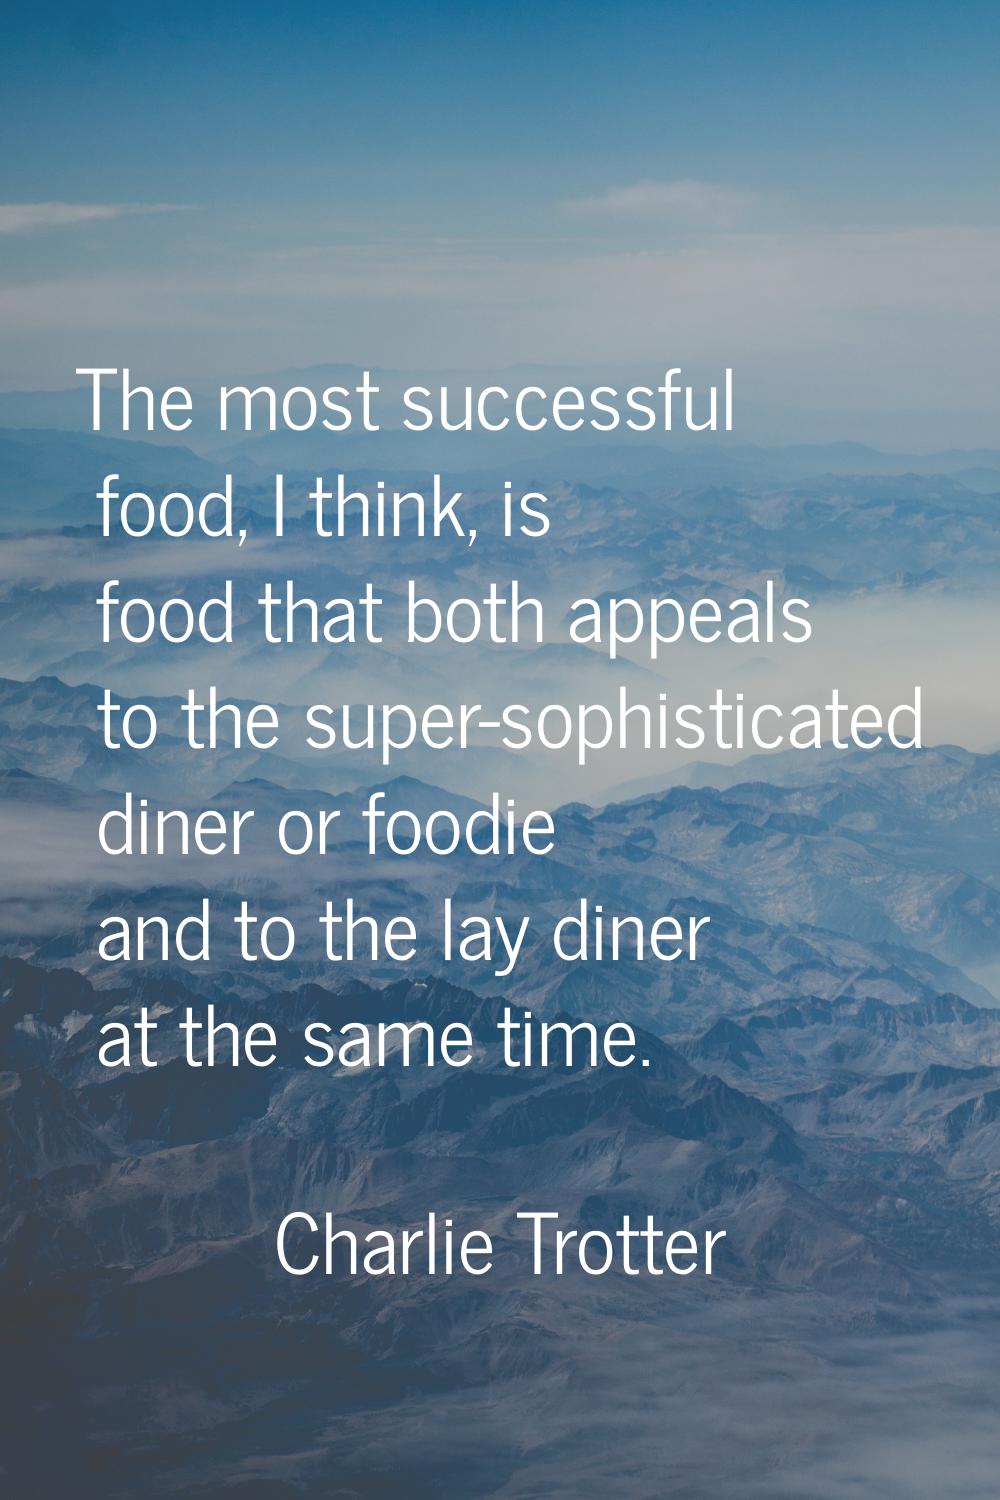 The most successful food, I think, is food that both appeals to the super-sophisticated diner or fo